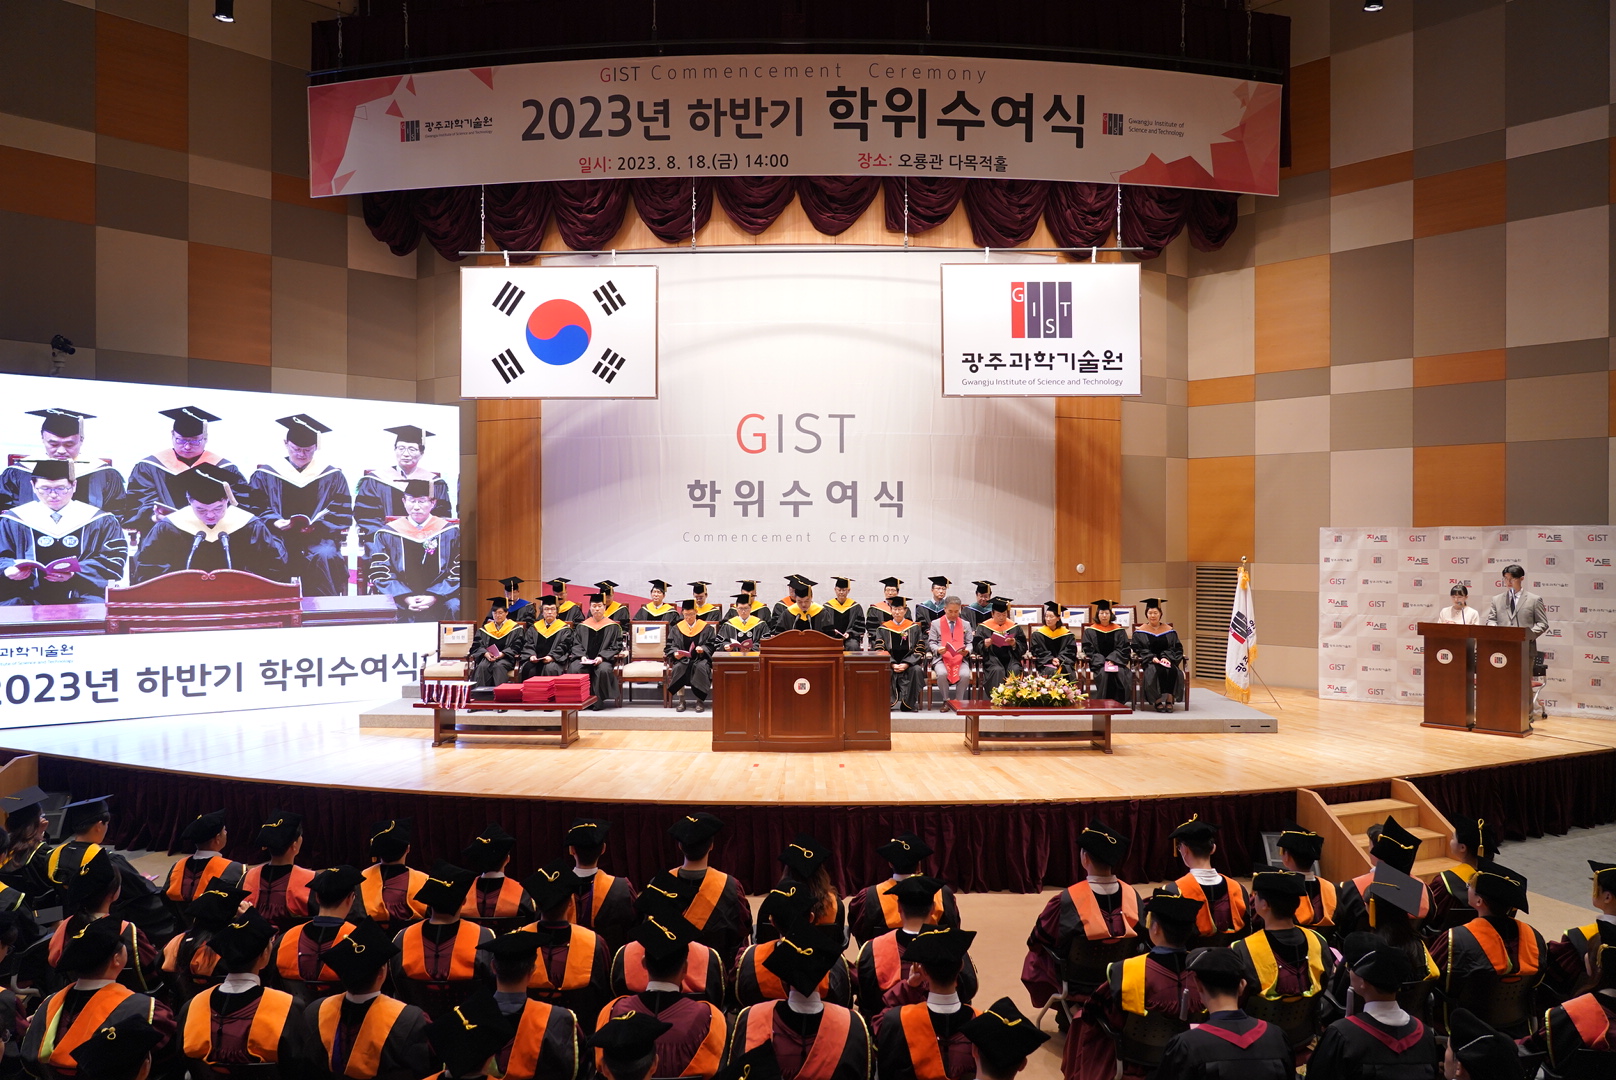 GIST held graduation ceremony for the second half of 2023 이미지